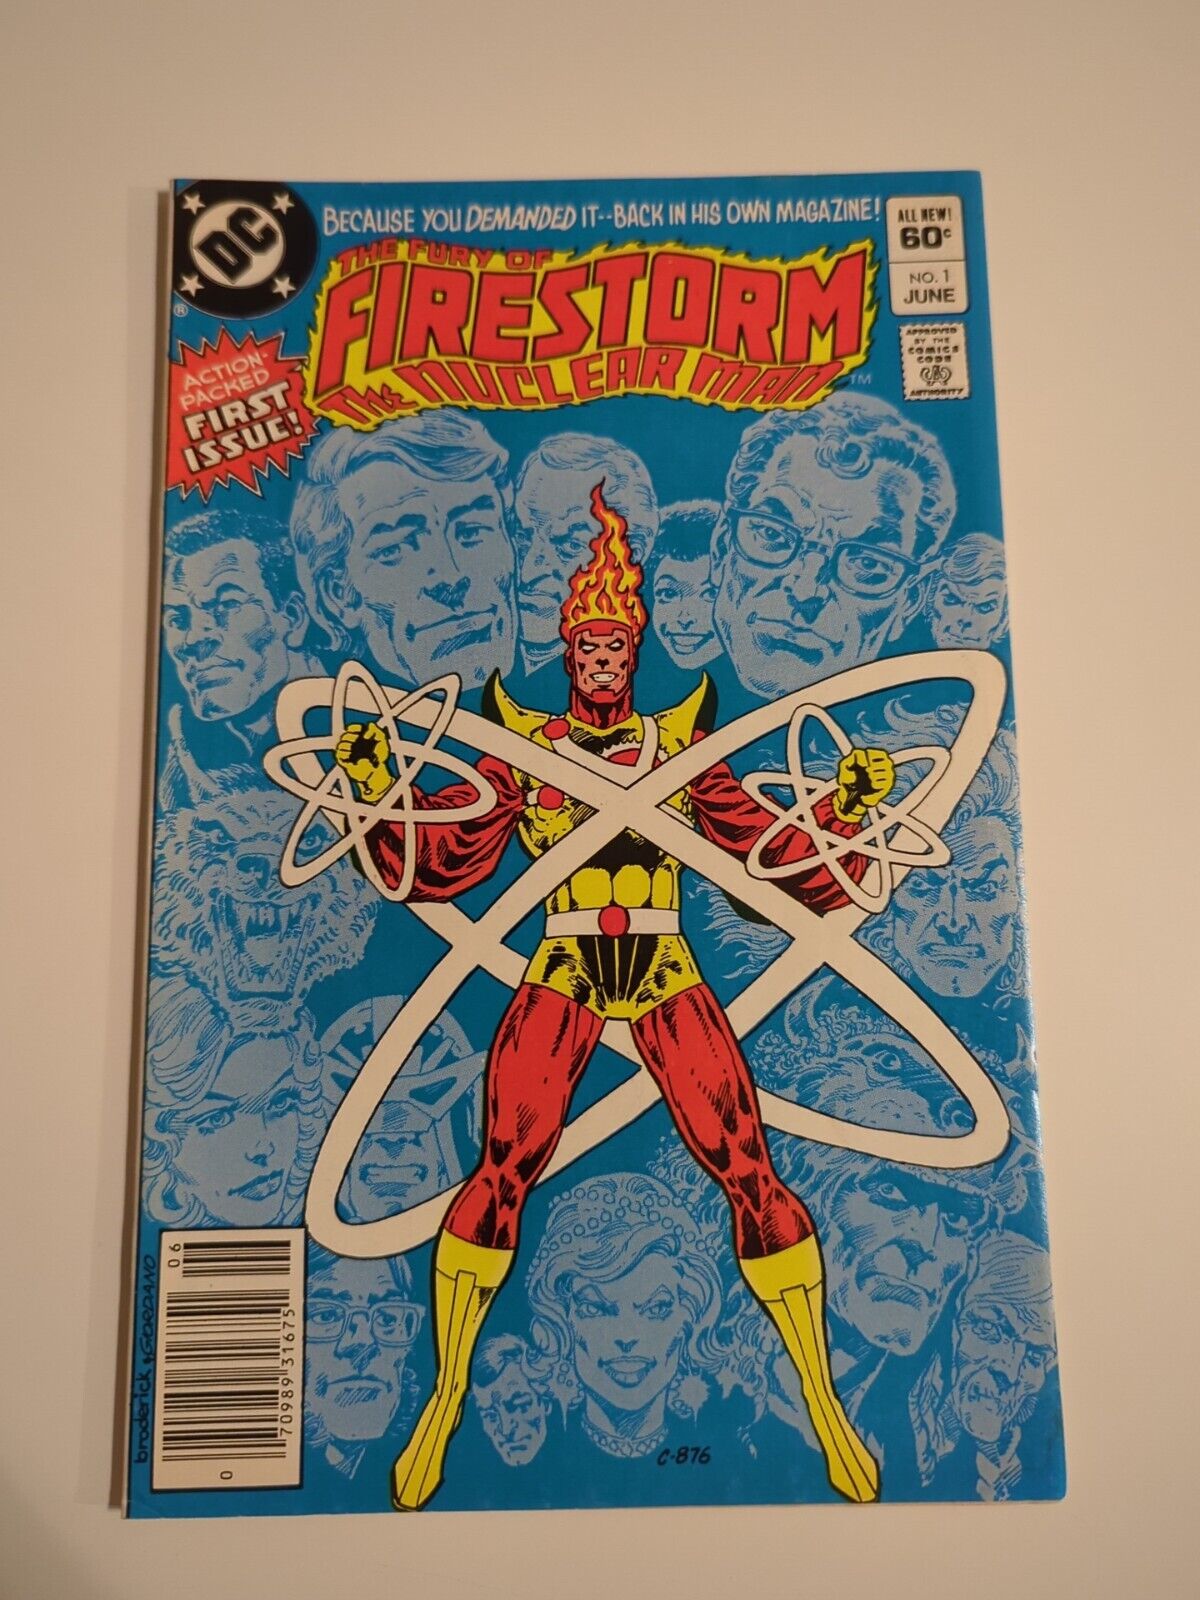 The Fury of Firestorm: The Nuclear Man mULTIPLE iSSUES